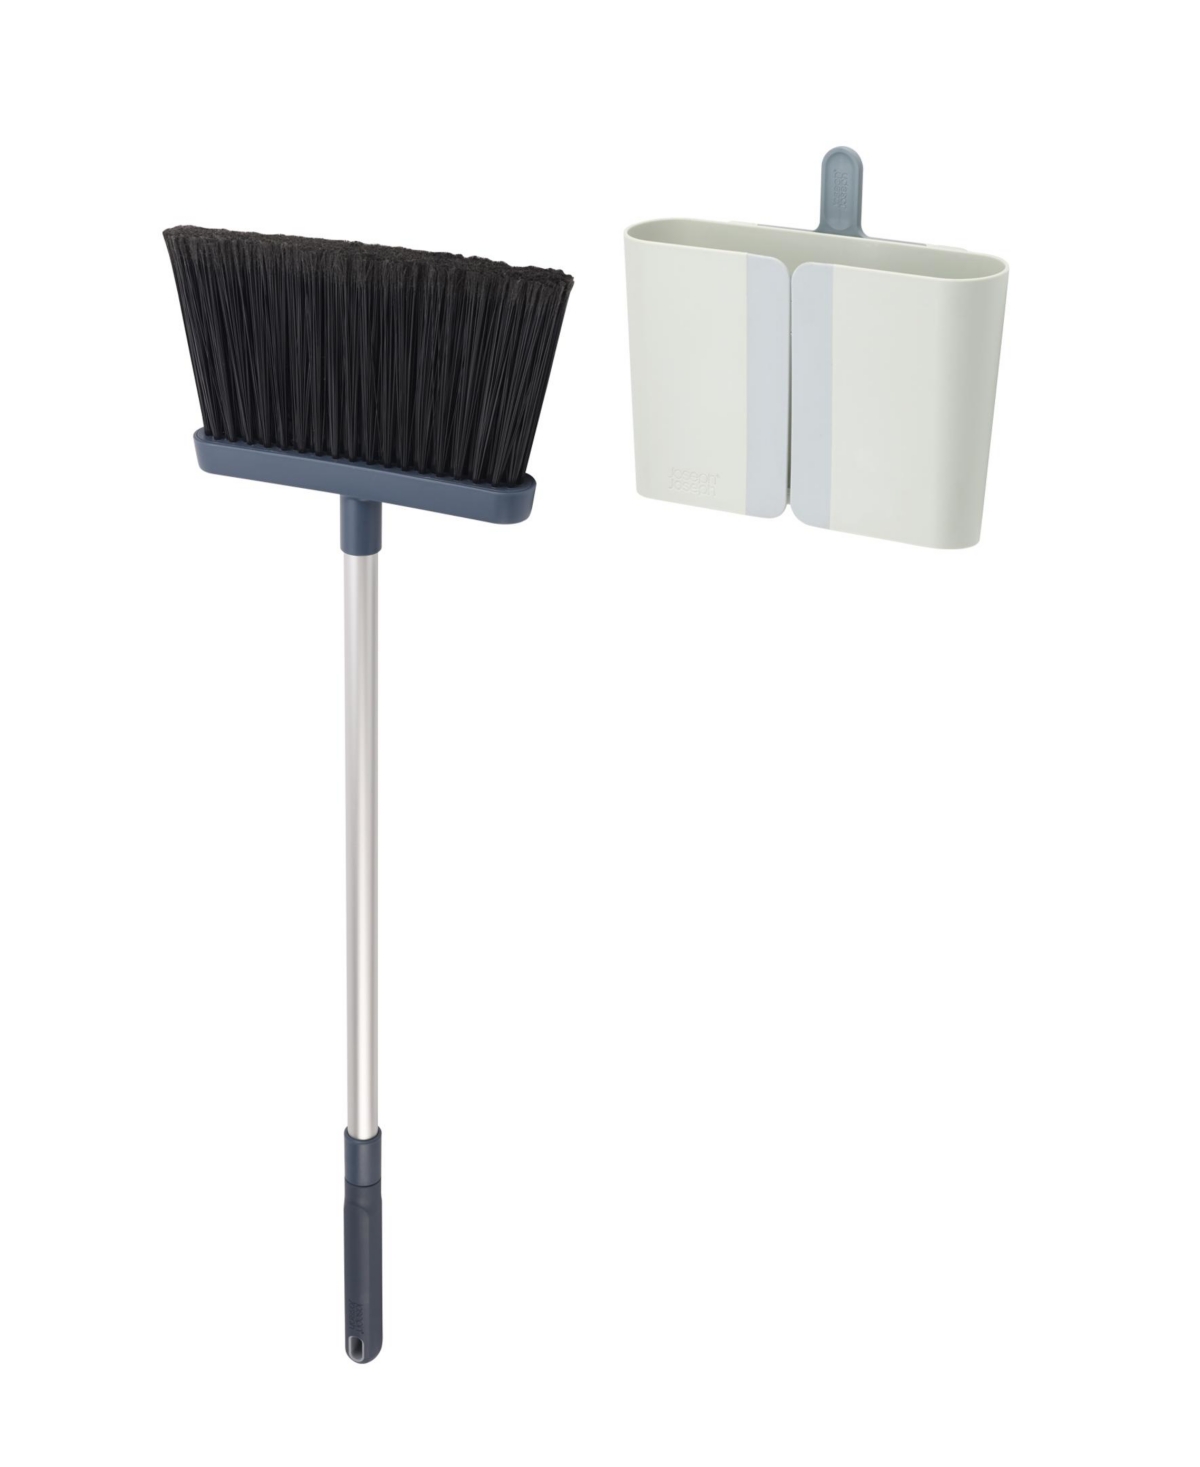 Joseph Joseph Cleanstore Wall-mounted Broom With Dust-shield Storage In Blue